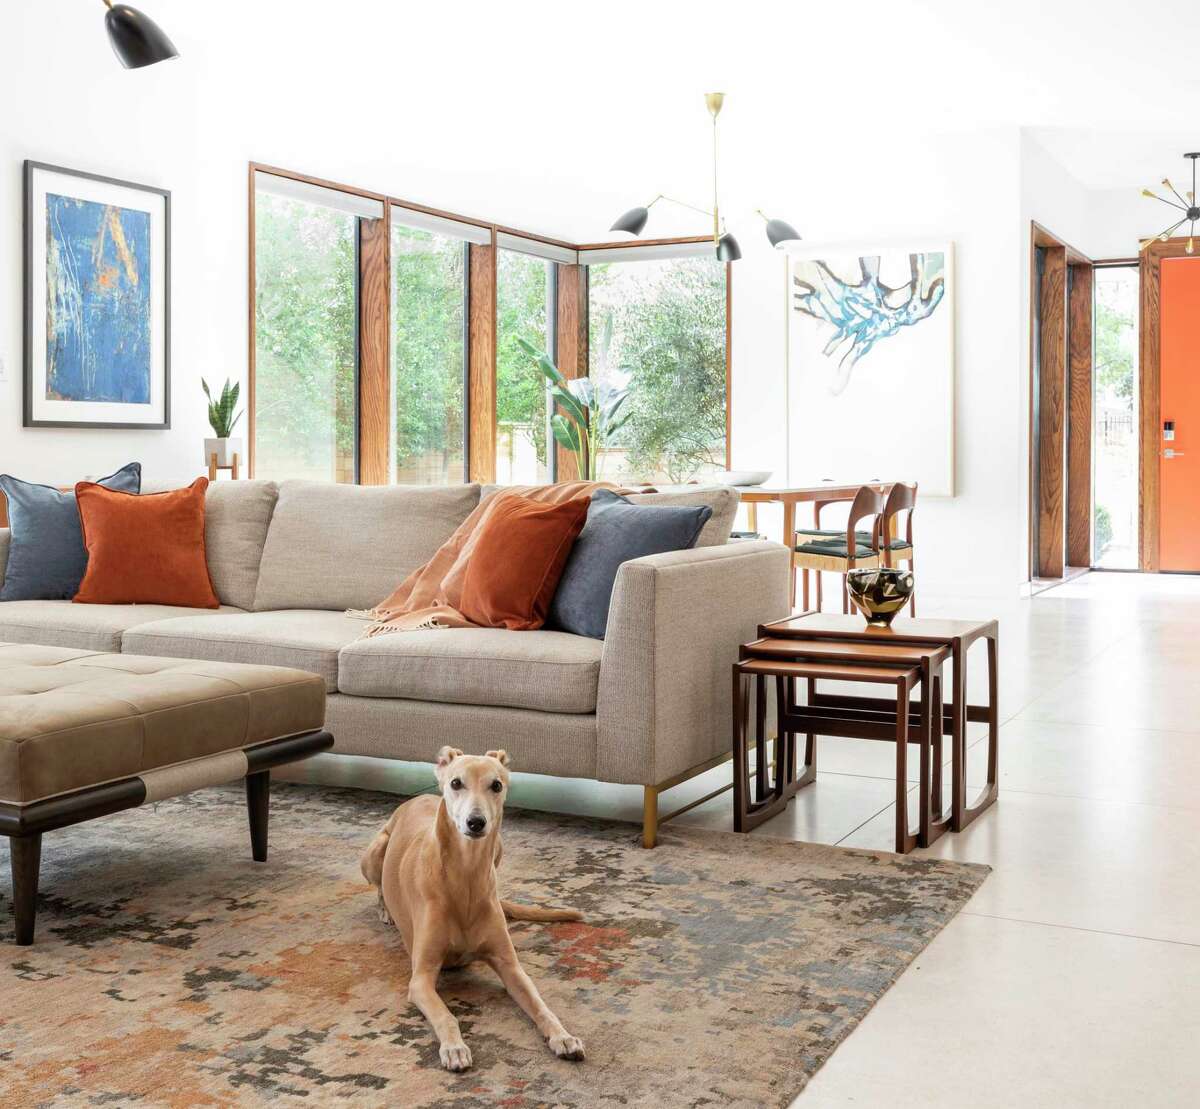 Leslie Hanna and Ryan Lawrence bought a home in Southgate and expanded by adding a second floor. Here, their 13-year-old whippet Cosby relaxes in the living room. Artwork at left in the photo is “Arena II” (1999), acrylic and gold leaf on paper by Steven Alexander.